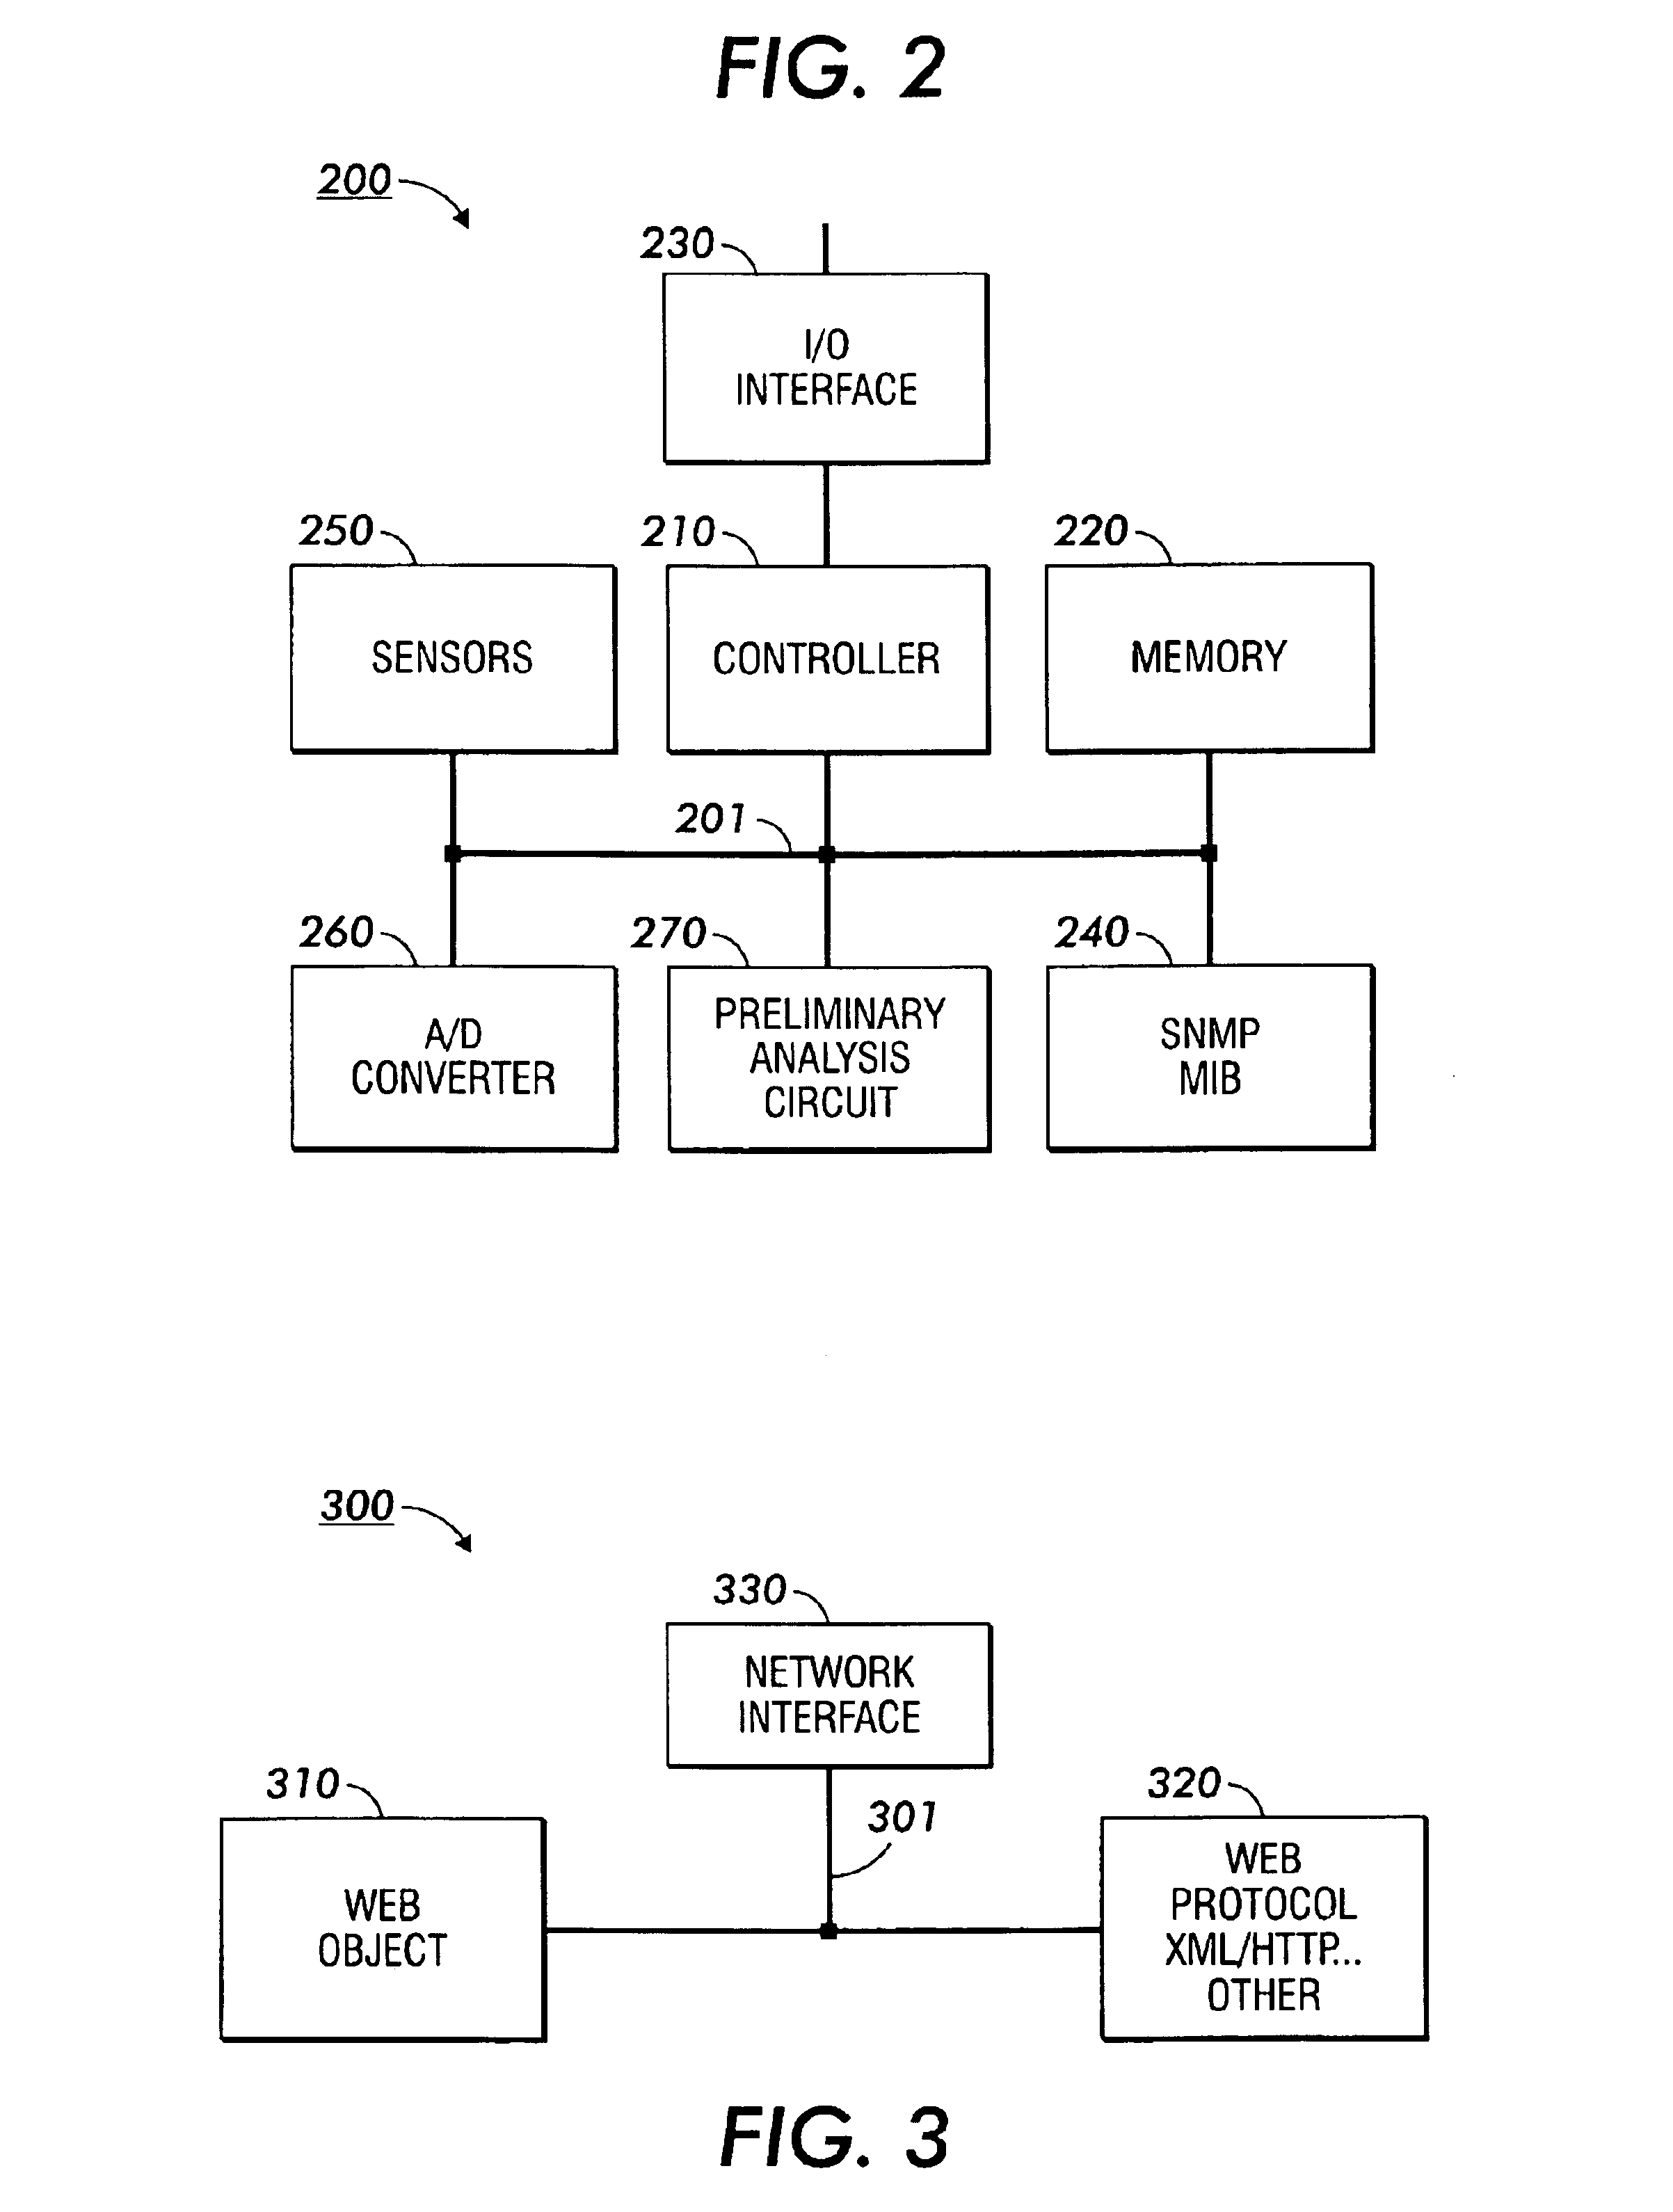 Mechanisms for web-object event/state-driven communication between networked devices